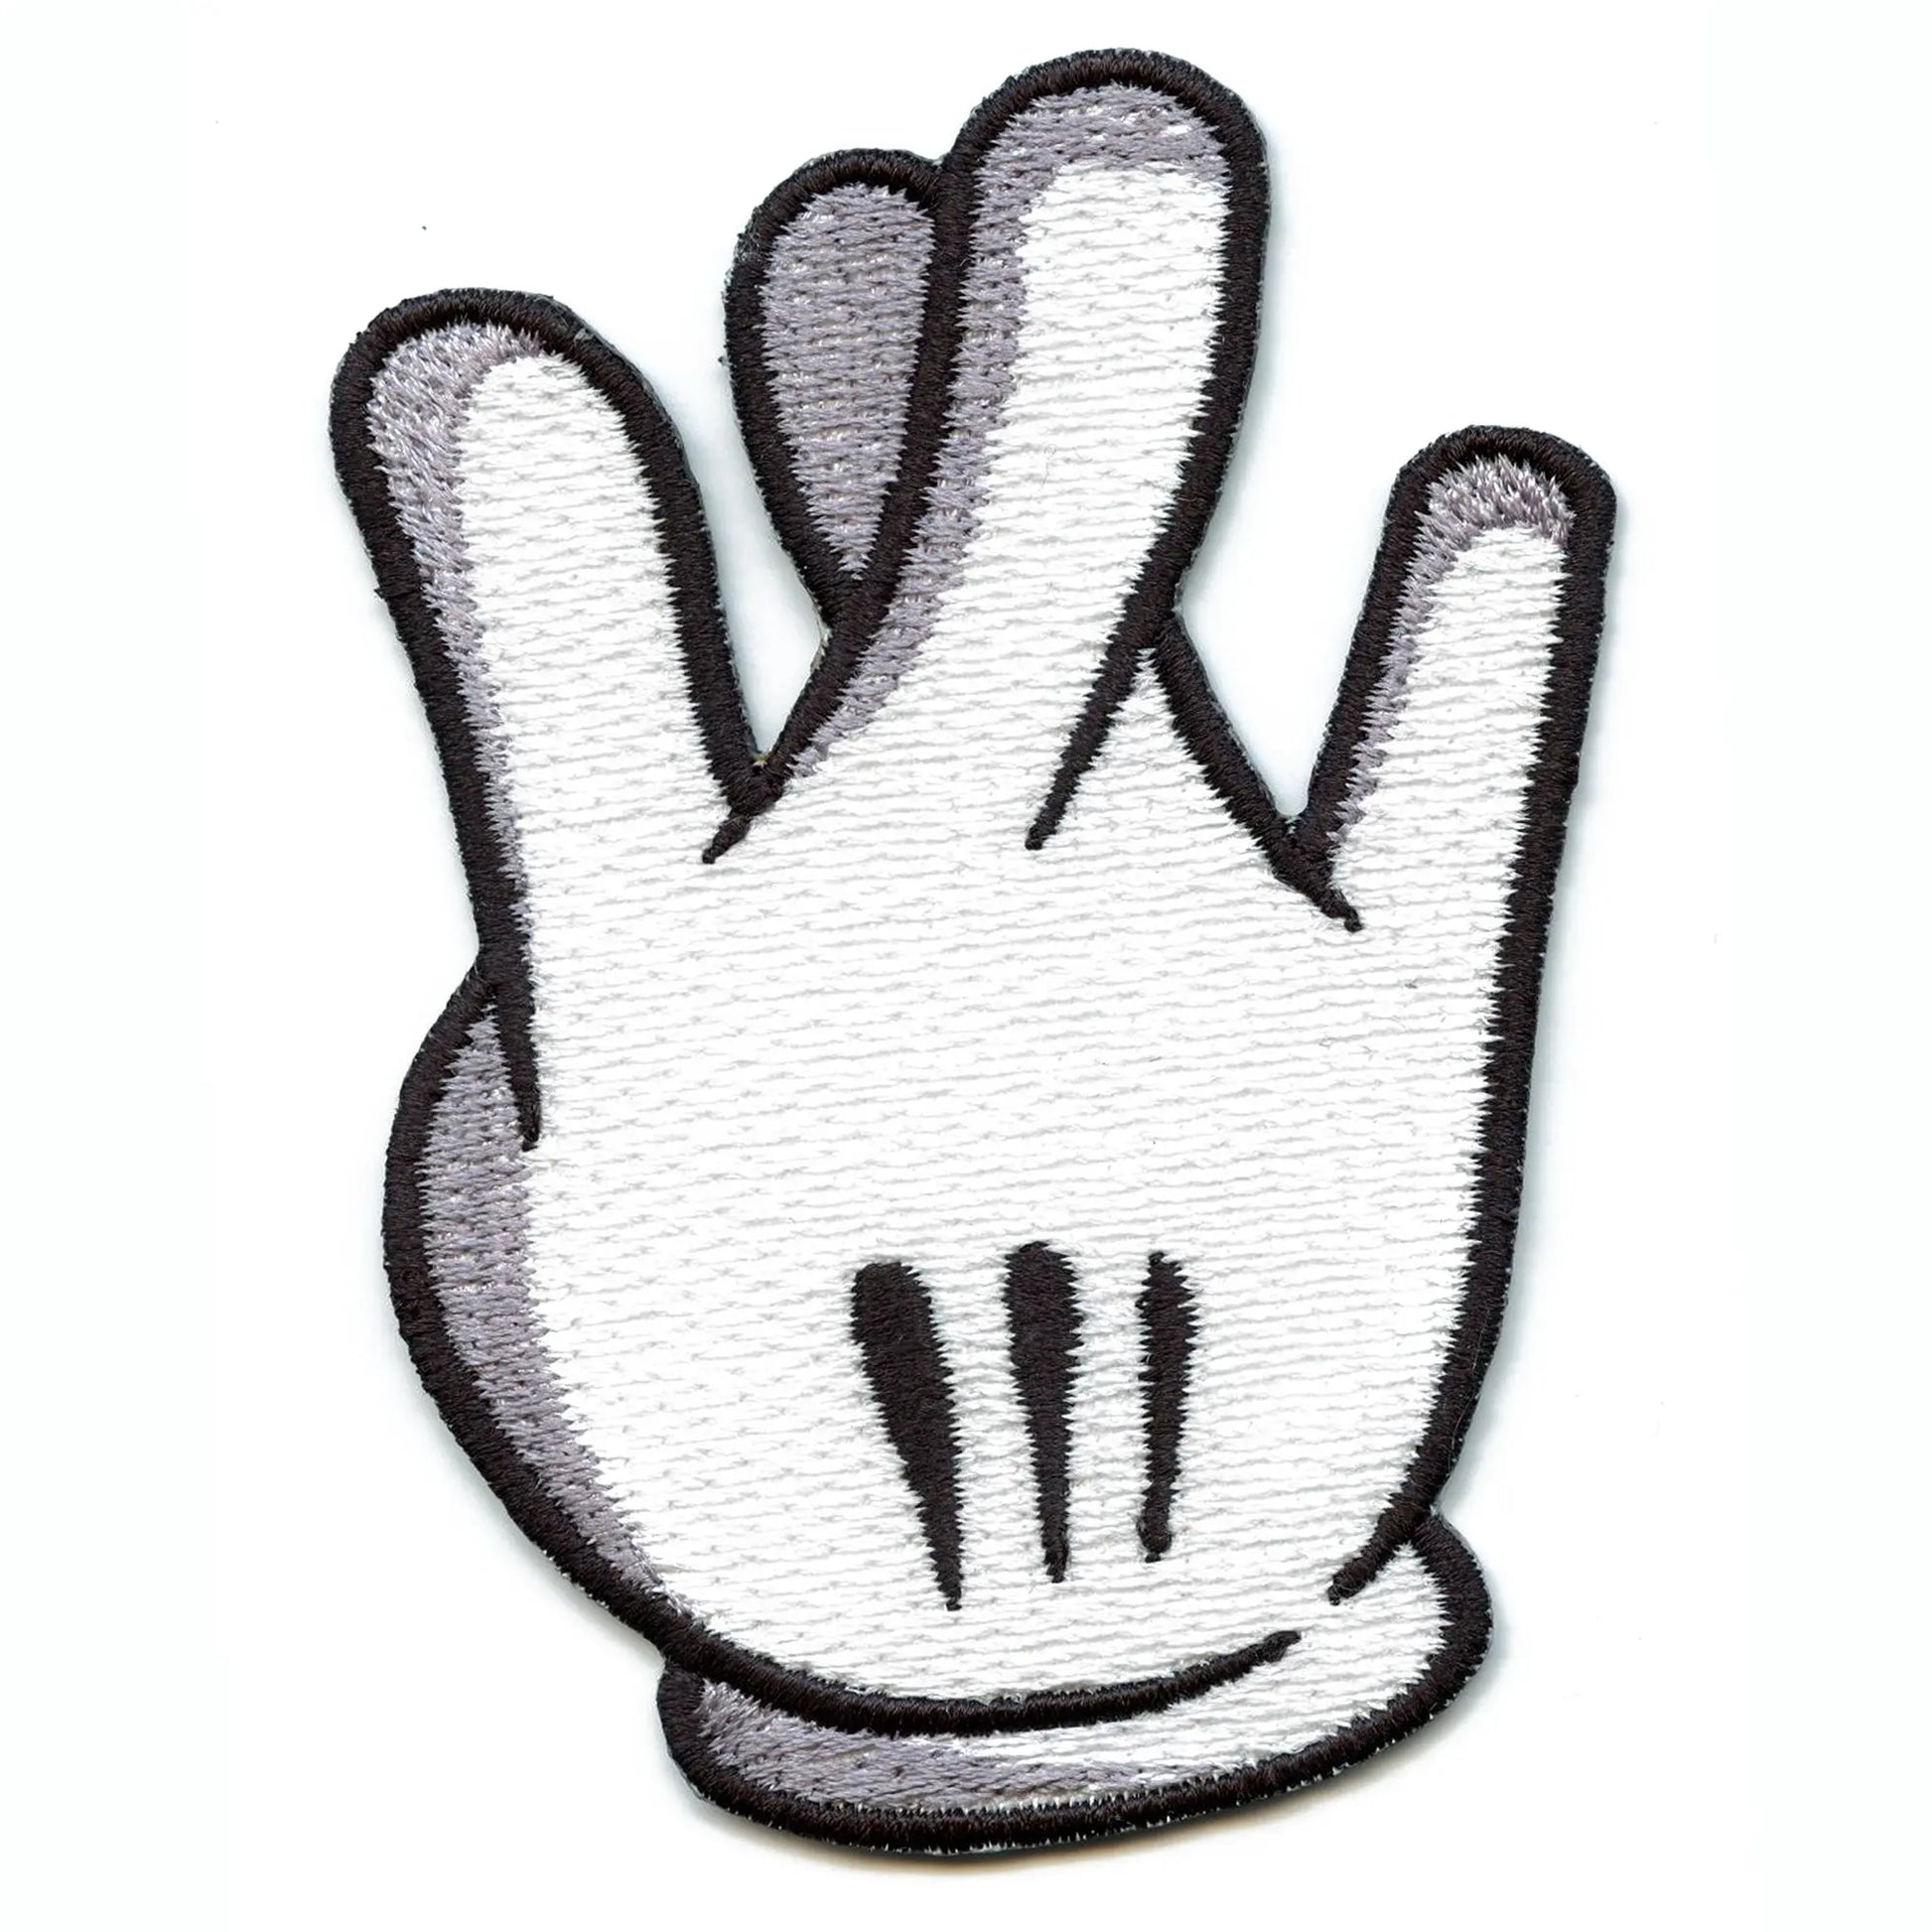 Westside California Glove Fingers Embroidered Iron On Patch 